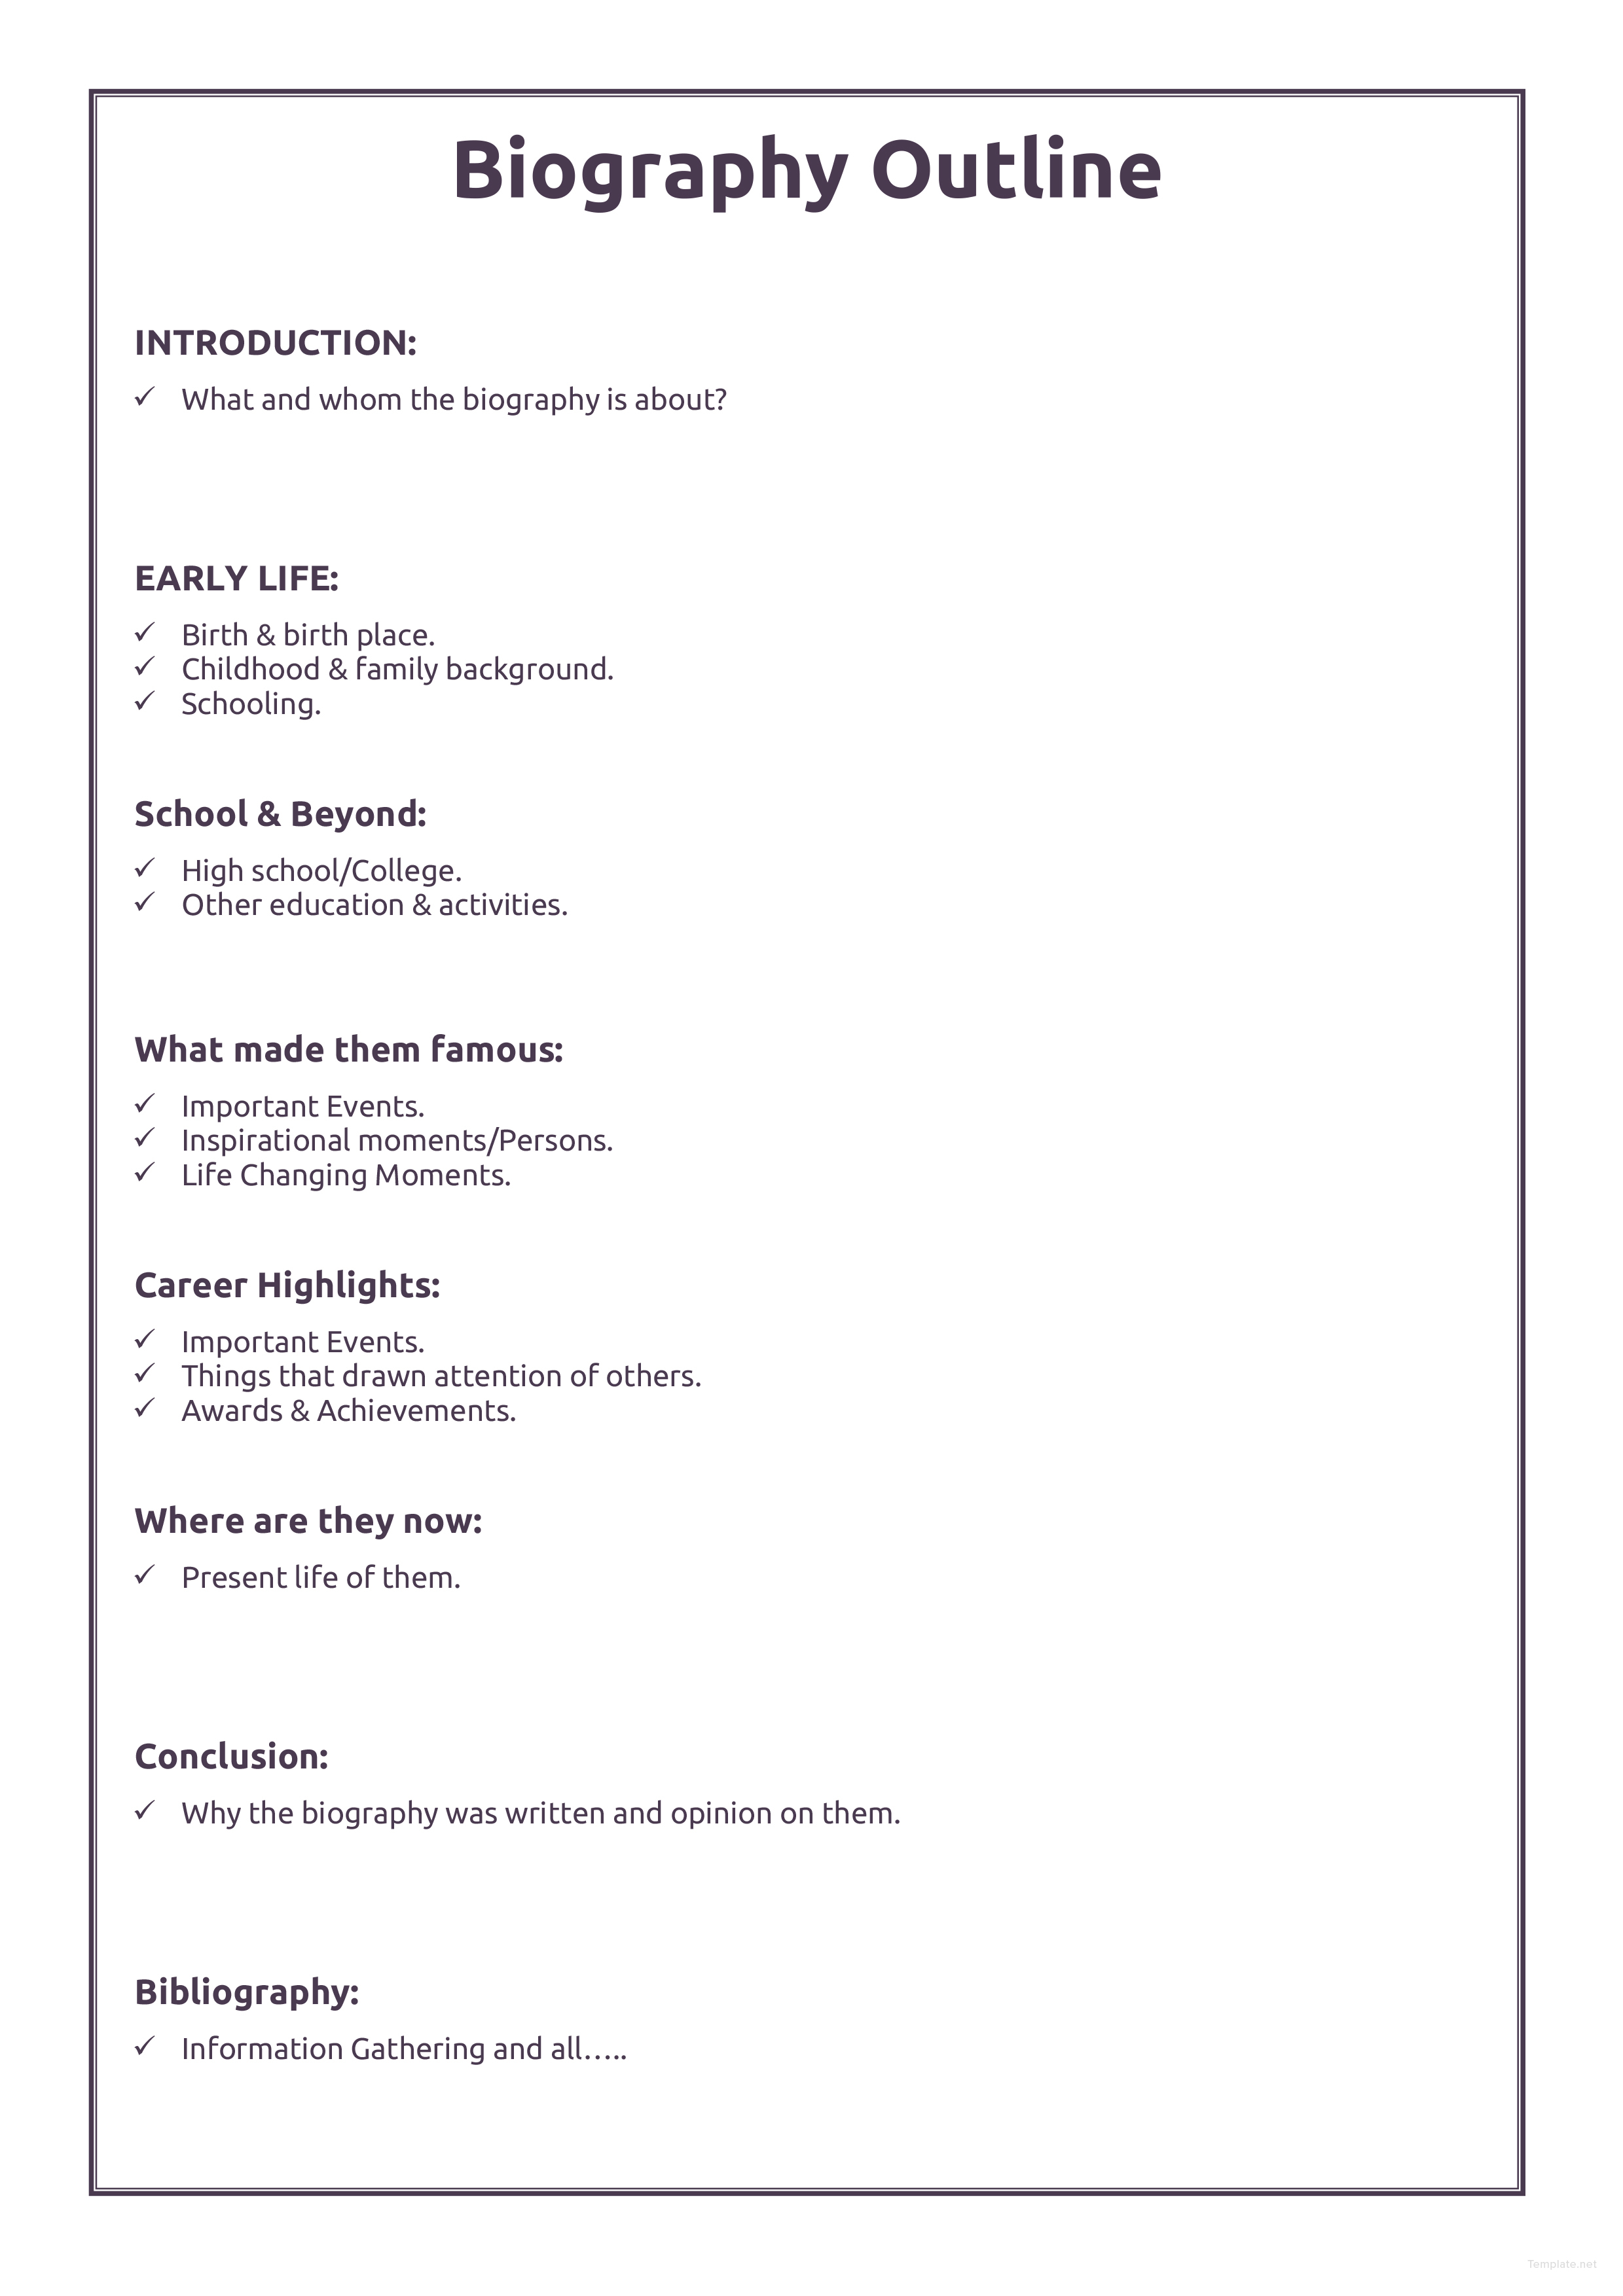 Professional Biography Outline Template In Microsoft Word Template